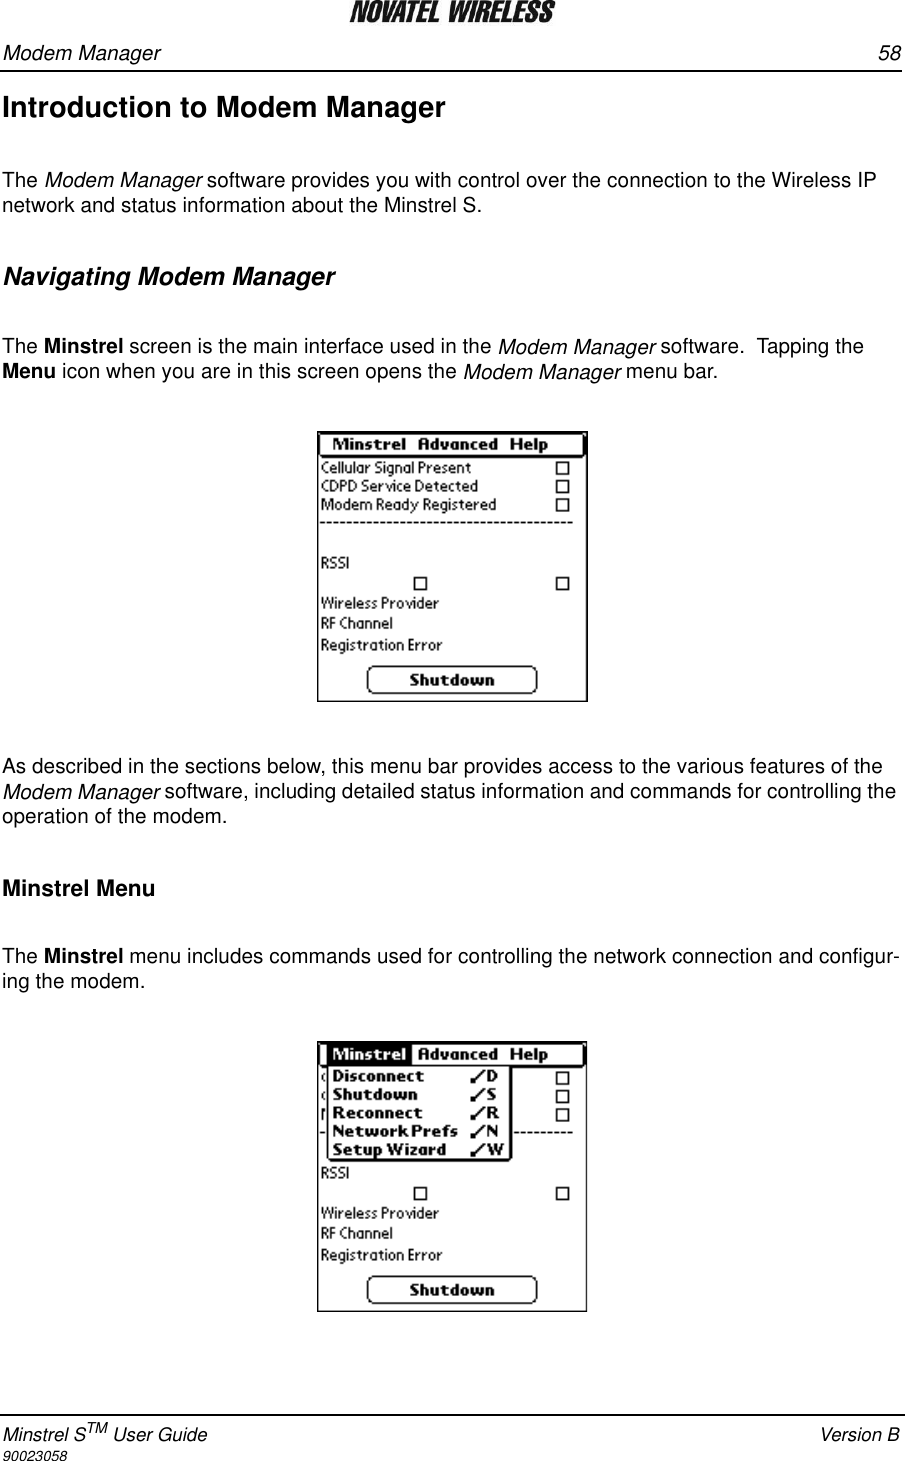 Modem Manager 58Minstrel STM User Guide Version B90023058Introduction to Modem ManagerThe Modem Manager software provides you with control over the connection to the Wireless IP network and status information about the Minstrel S.Navigating Modem ManagerThe Minstrel screen is the main interface used in the Modem Manager software.  Tapping the Menu icon when you are in this screen opens the Modem Manager menu bar. As described in the sections below, this menu bar provides access to the various features of the Modem Manager software, including detailed status information and commands for controlling the operation of the modem.  Minstrel MenuThe Minstrel menu includes commands used for controlling the network connection and configur-ing the modem.   